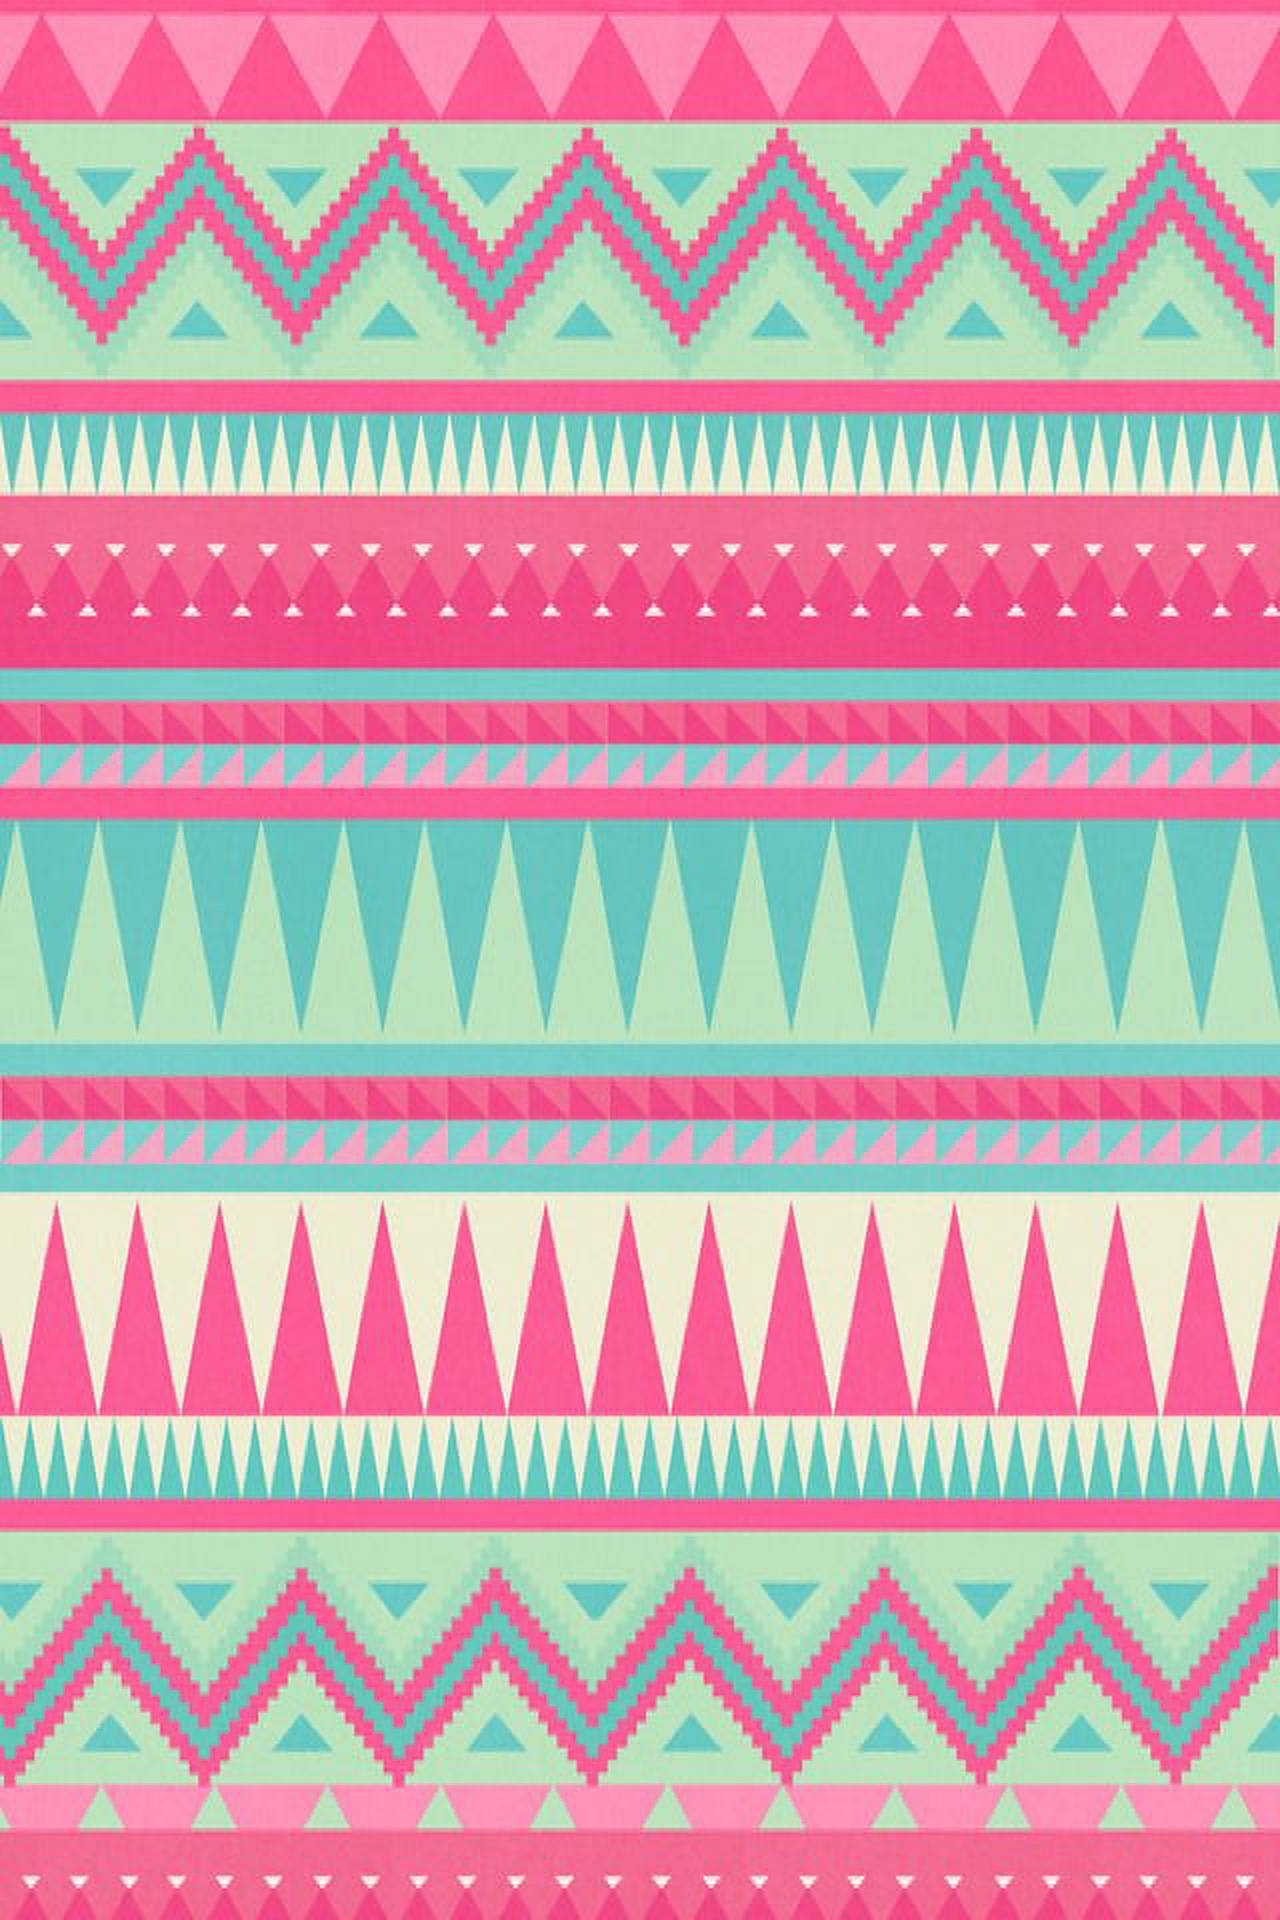 Vibrant Pink And Teal Tribal Pattern Background